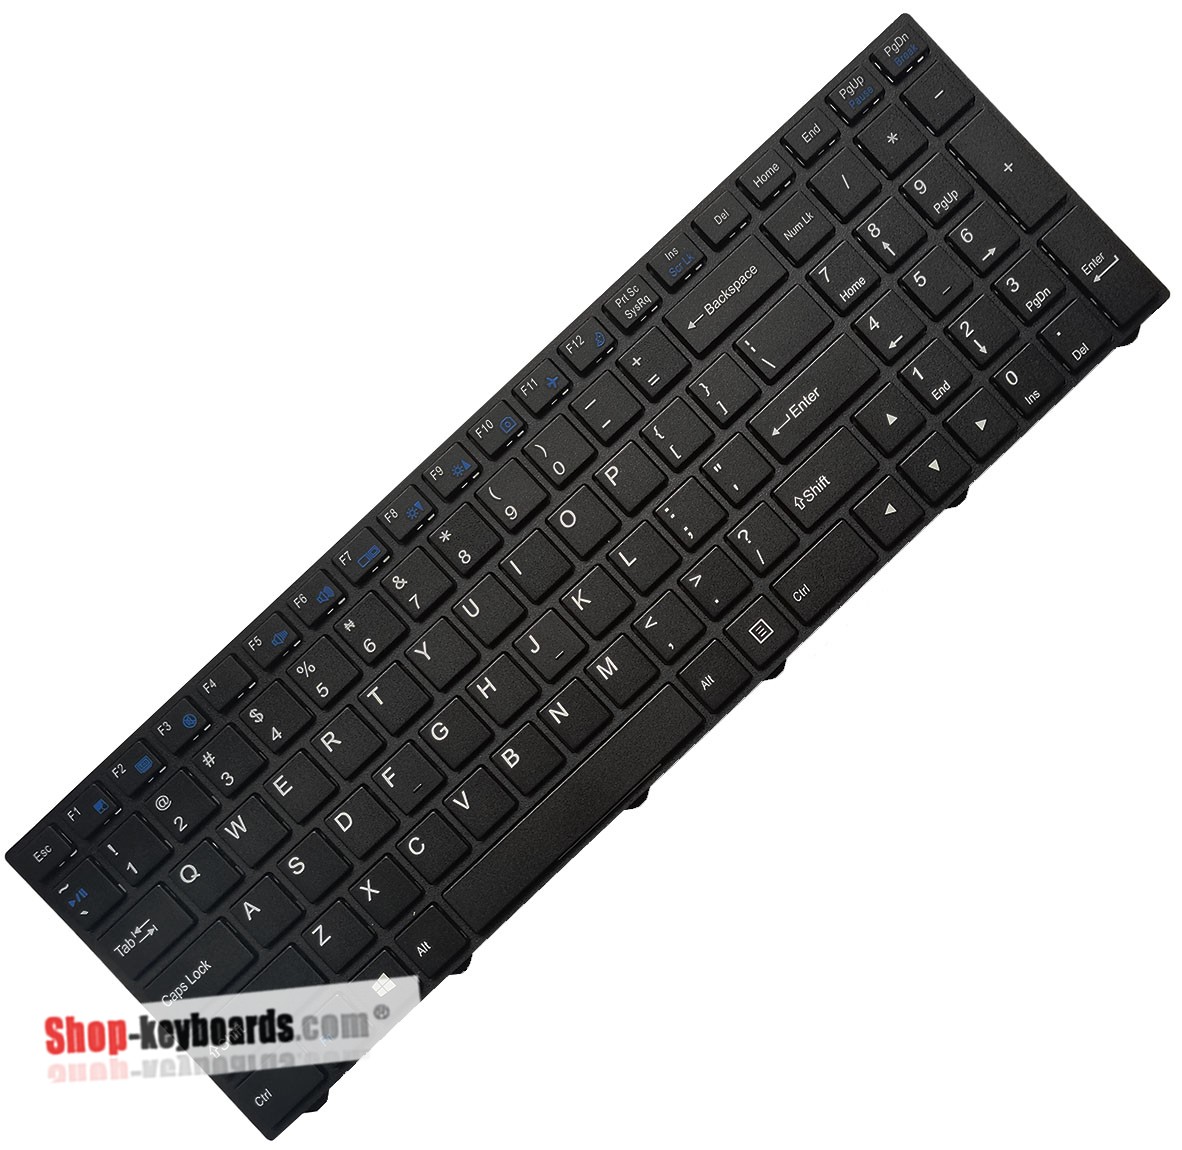 Sony VAIO Fit 15S Keyboard replacement